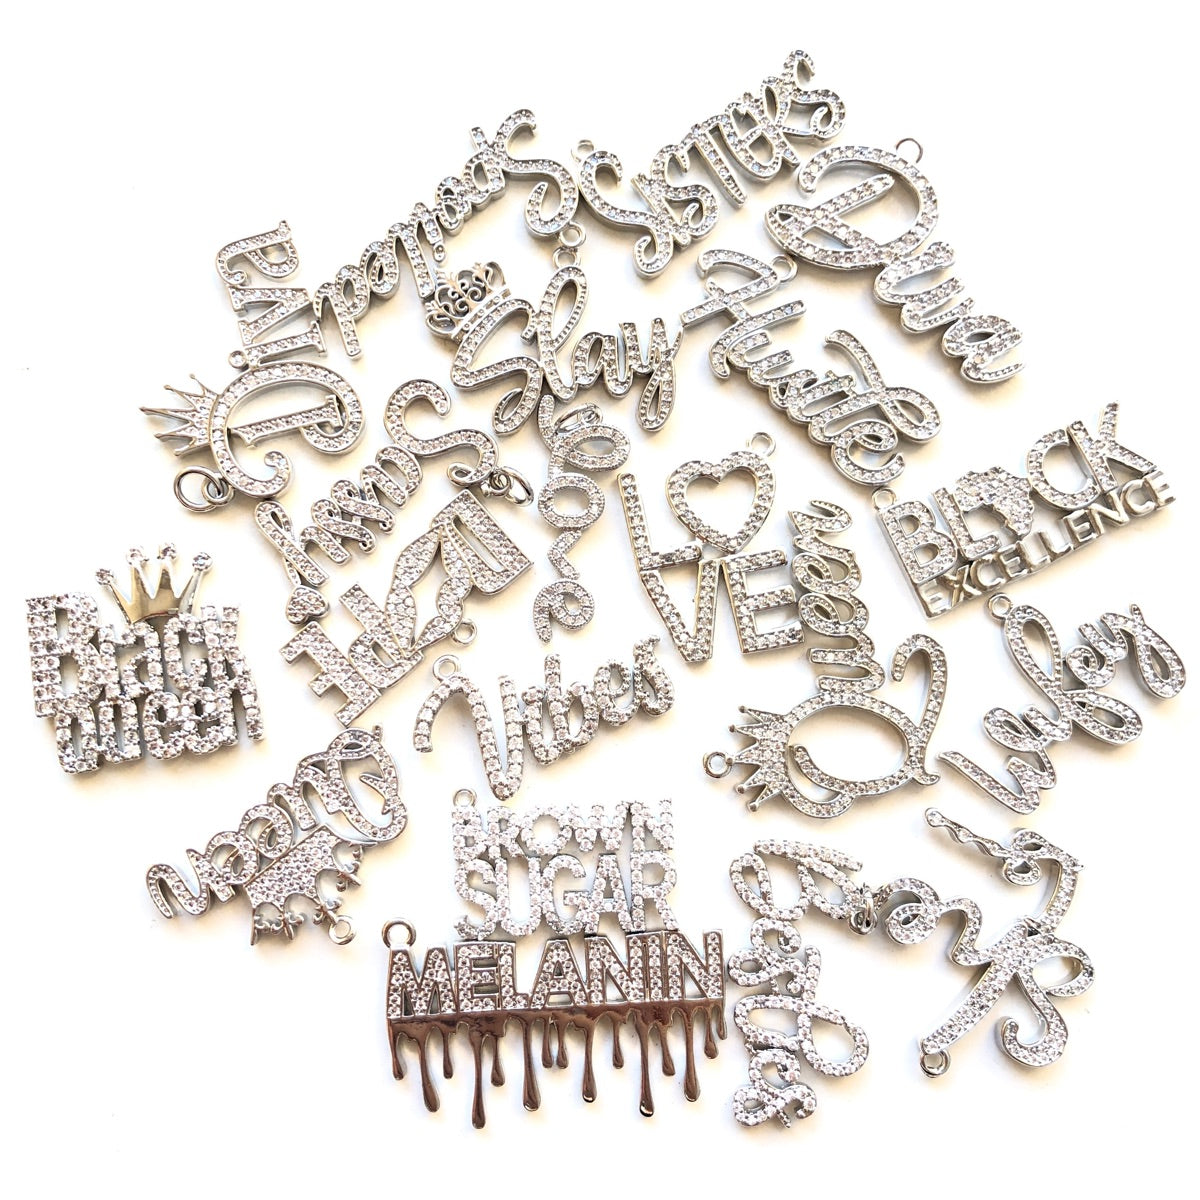 20pcs/lot Mix Diva Wifey Love Black Queen Slay... Word Charms Bundle Silver CZ Paved Charms Mix Charms On Sale Charms Beads Beyond